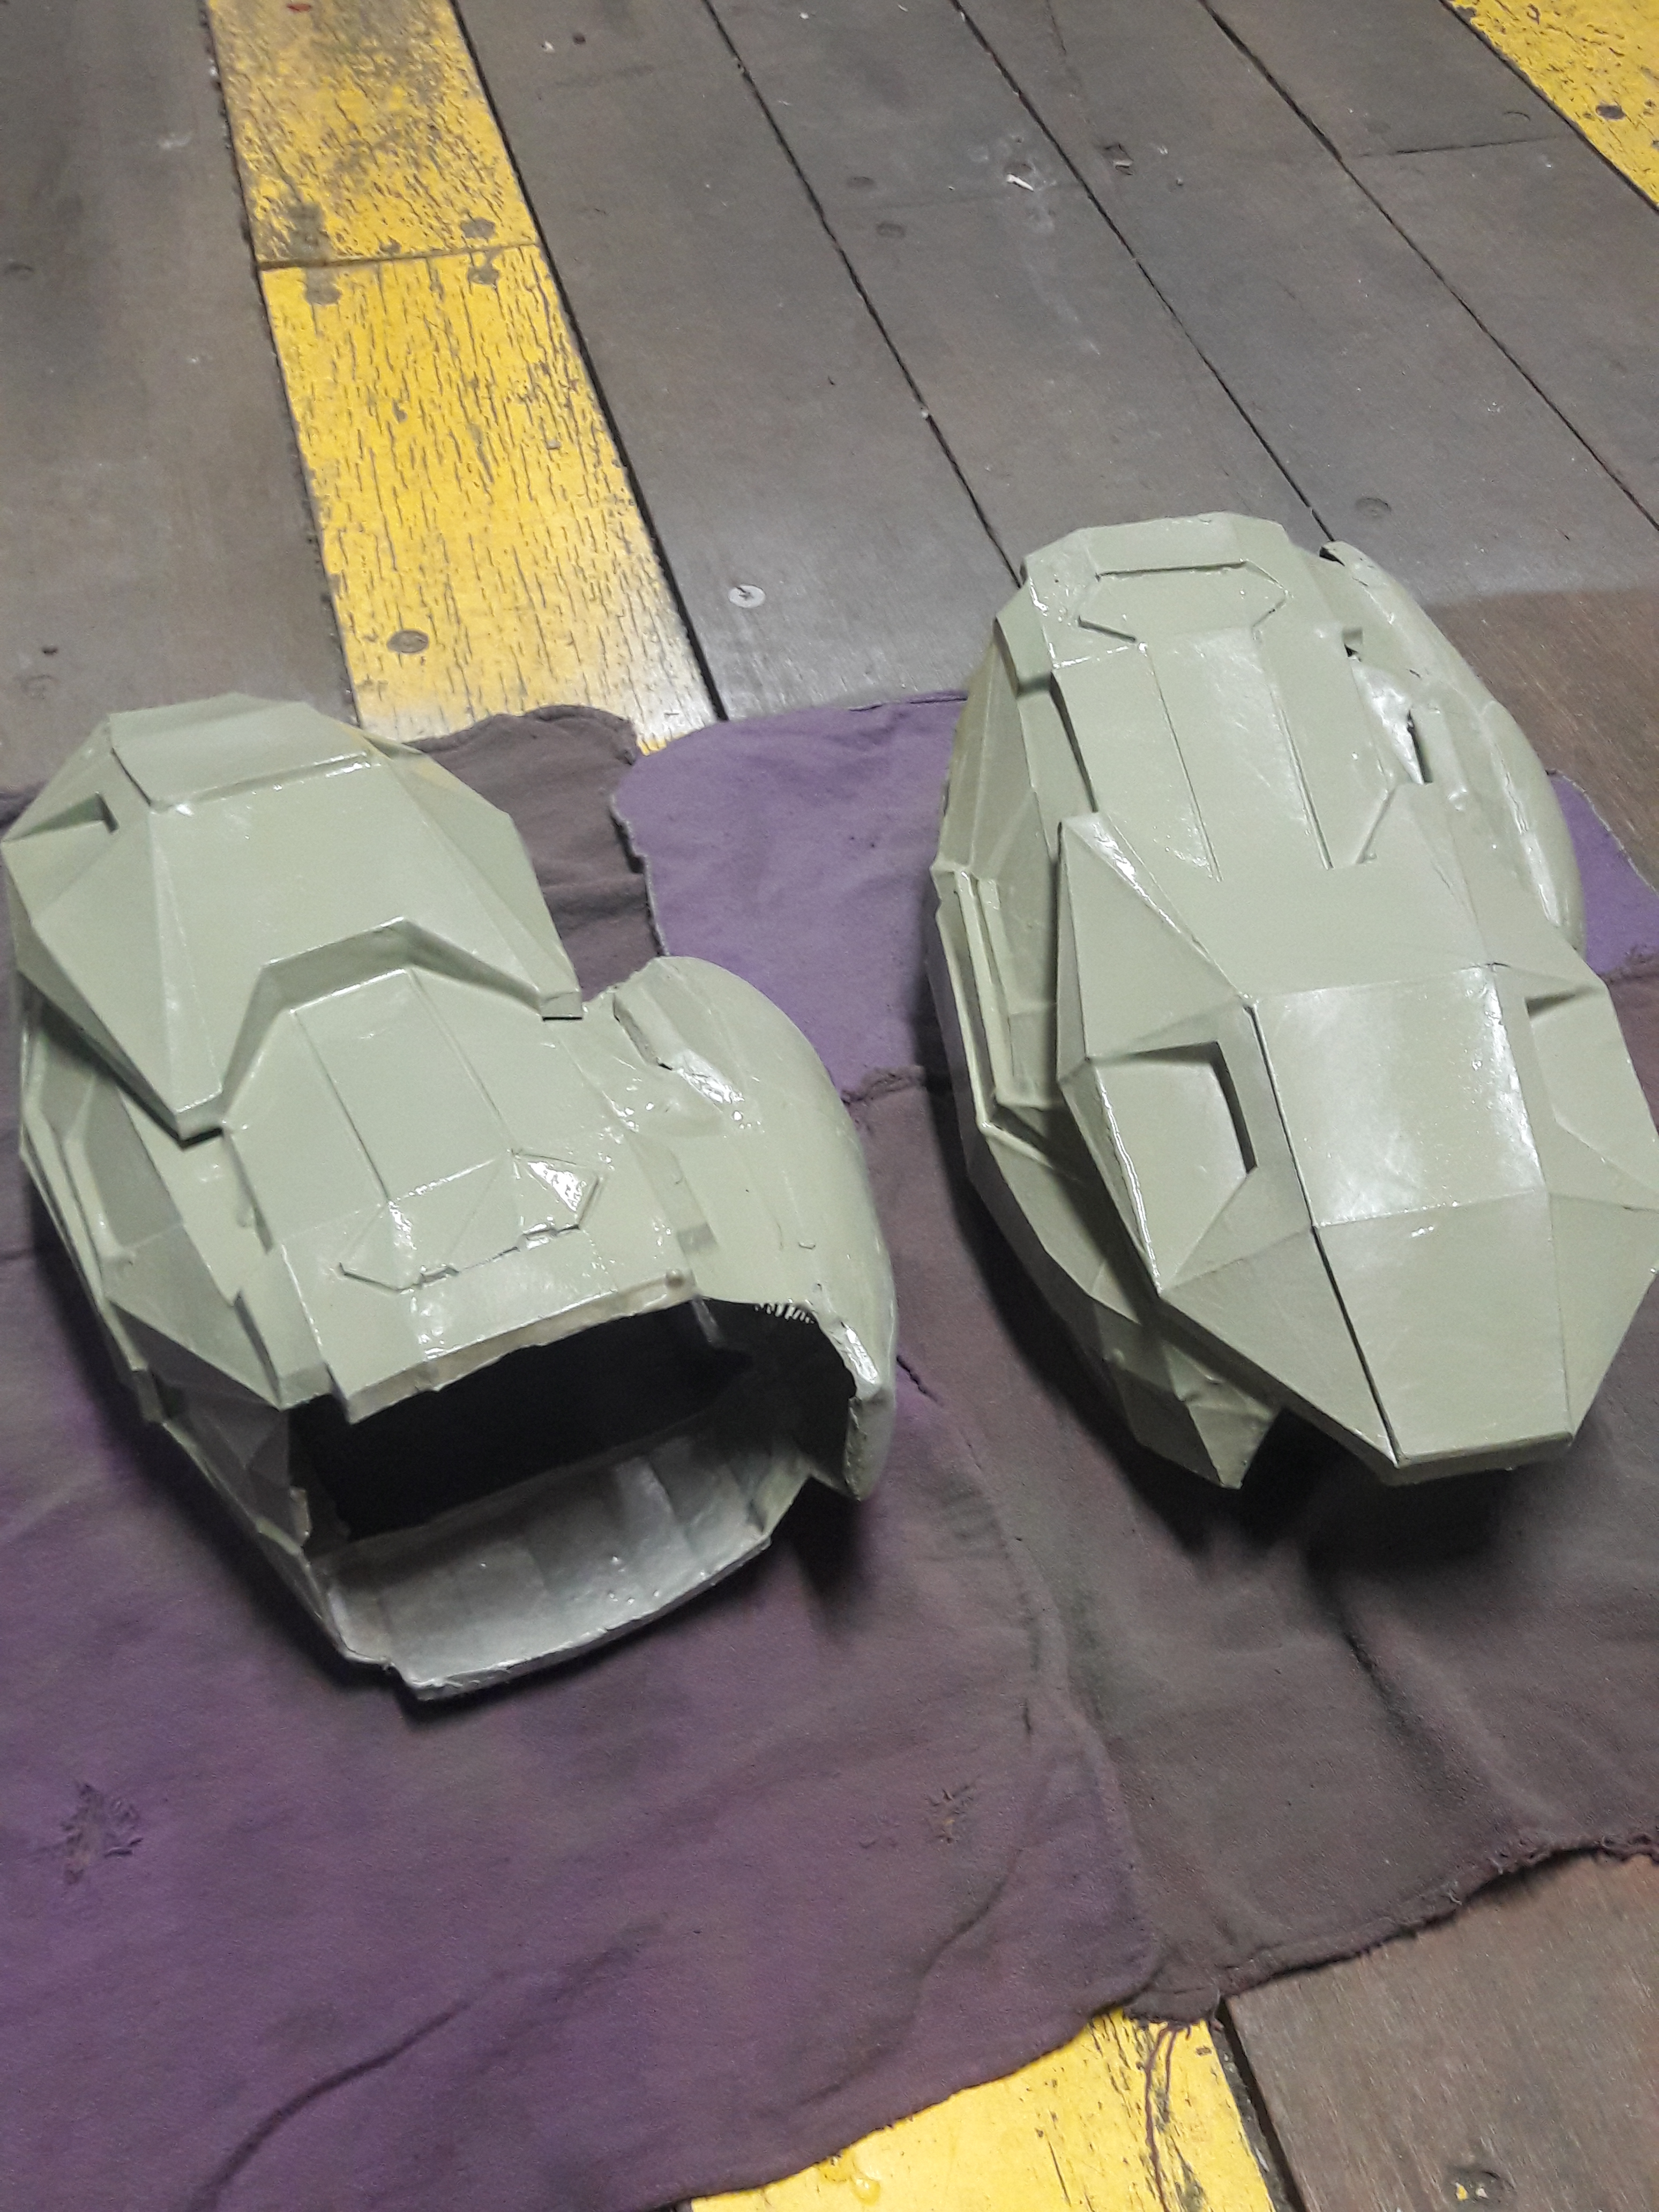 now time for weathering.